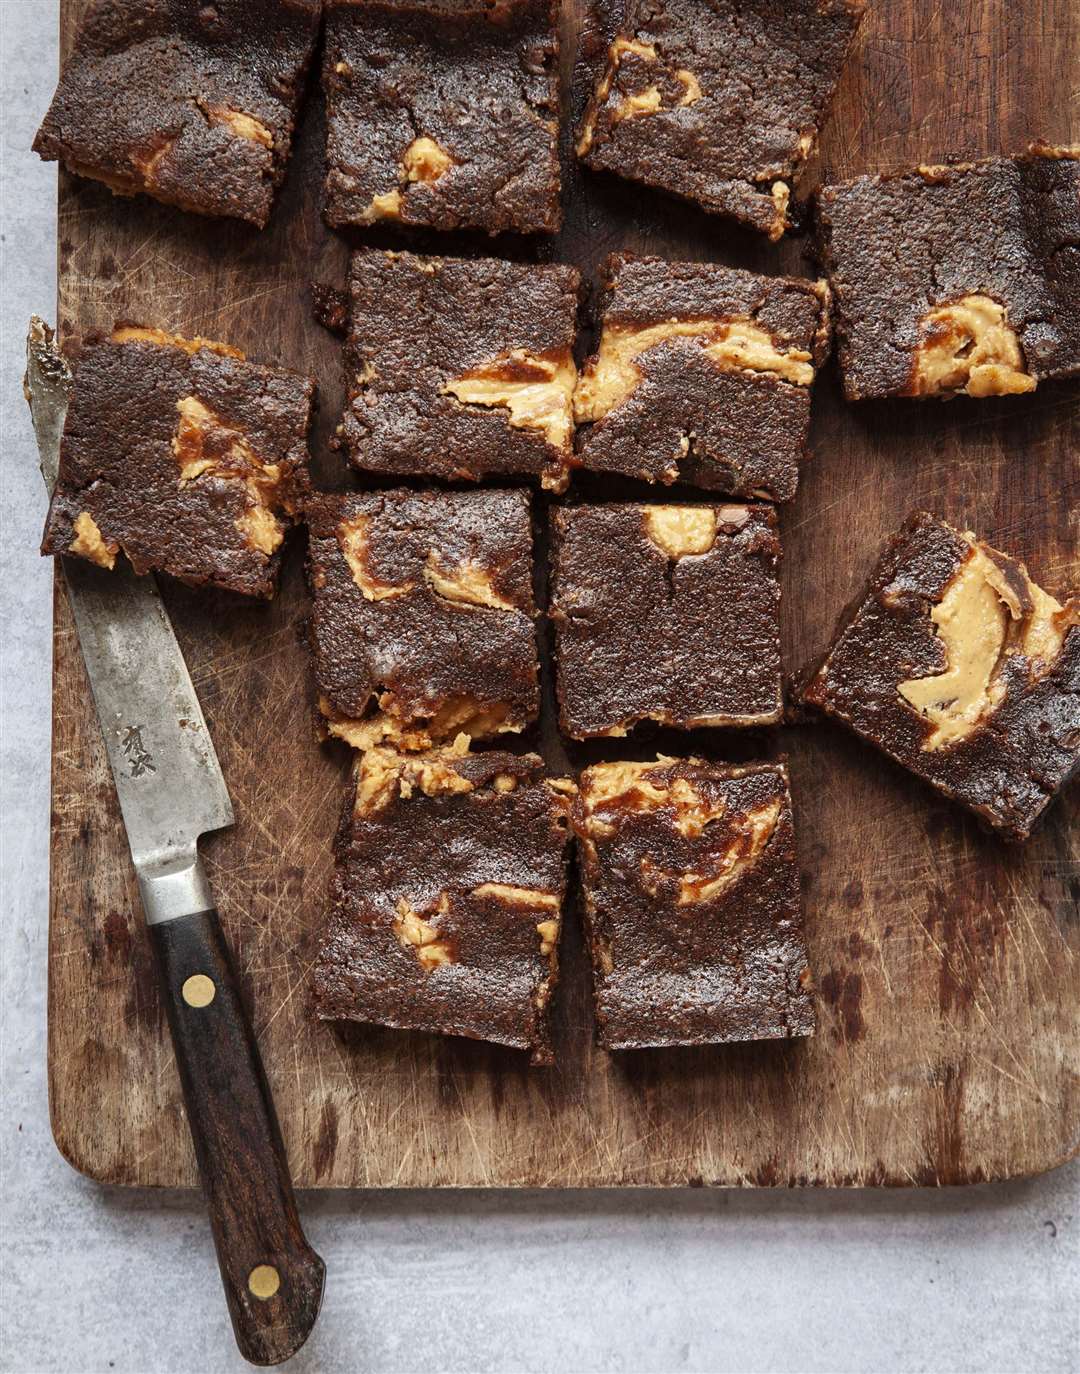 Dairy free brownies by the Hairy Bikers Picture: Andrew Hayes-Watkins